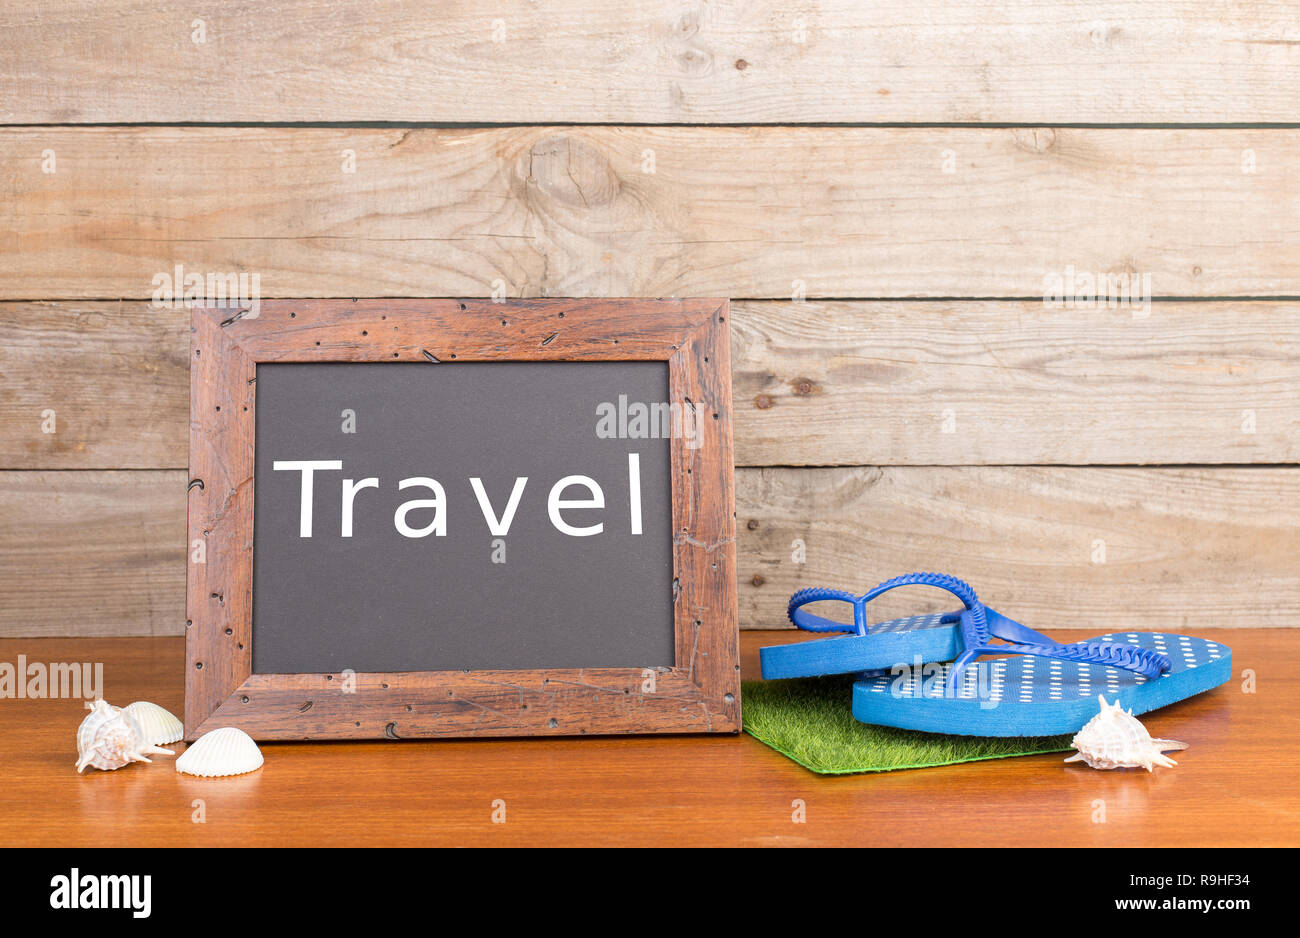 Travel concept - flops, seashells and blackboard with inscription 'Travel' Stock Photo